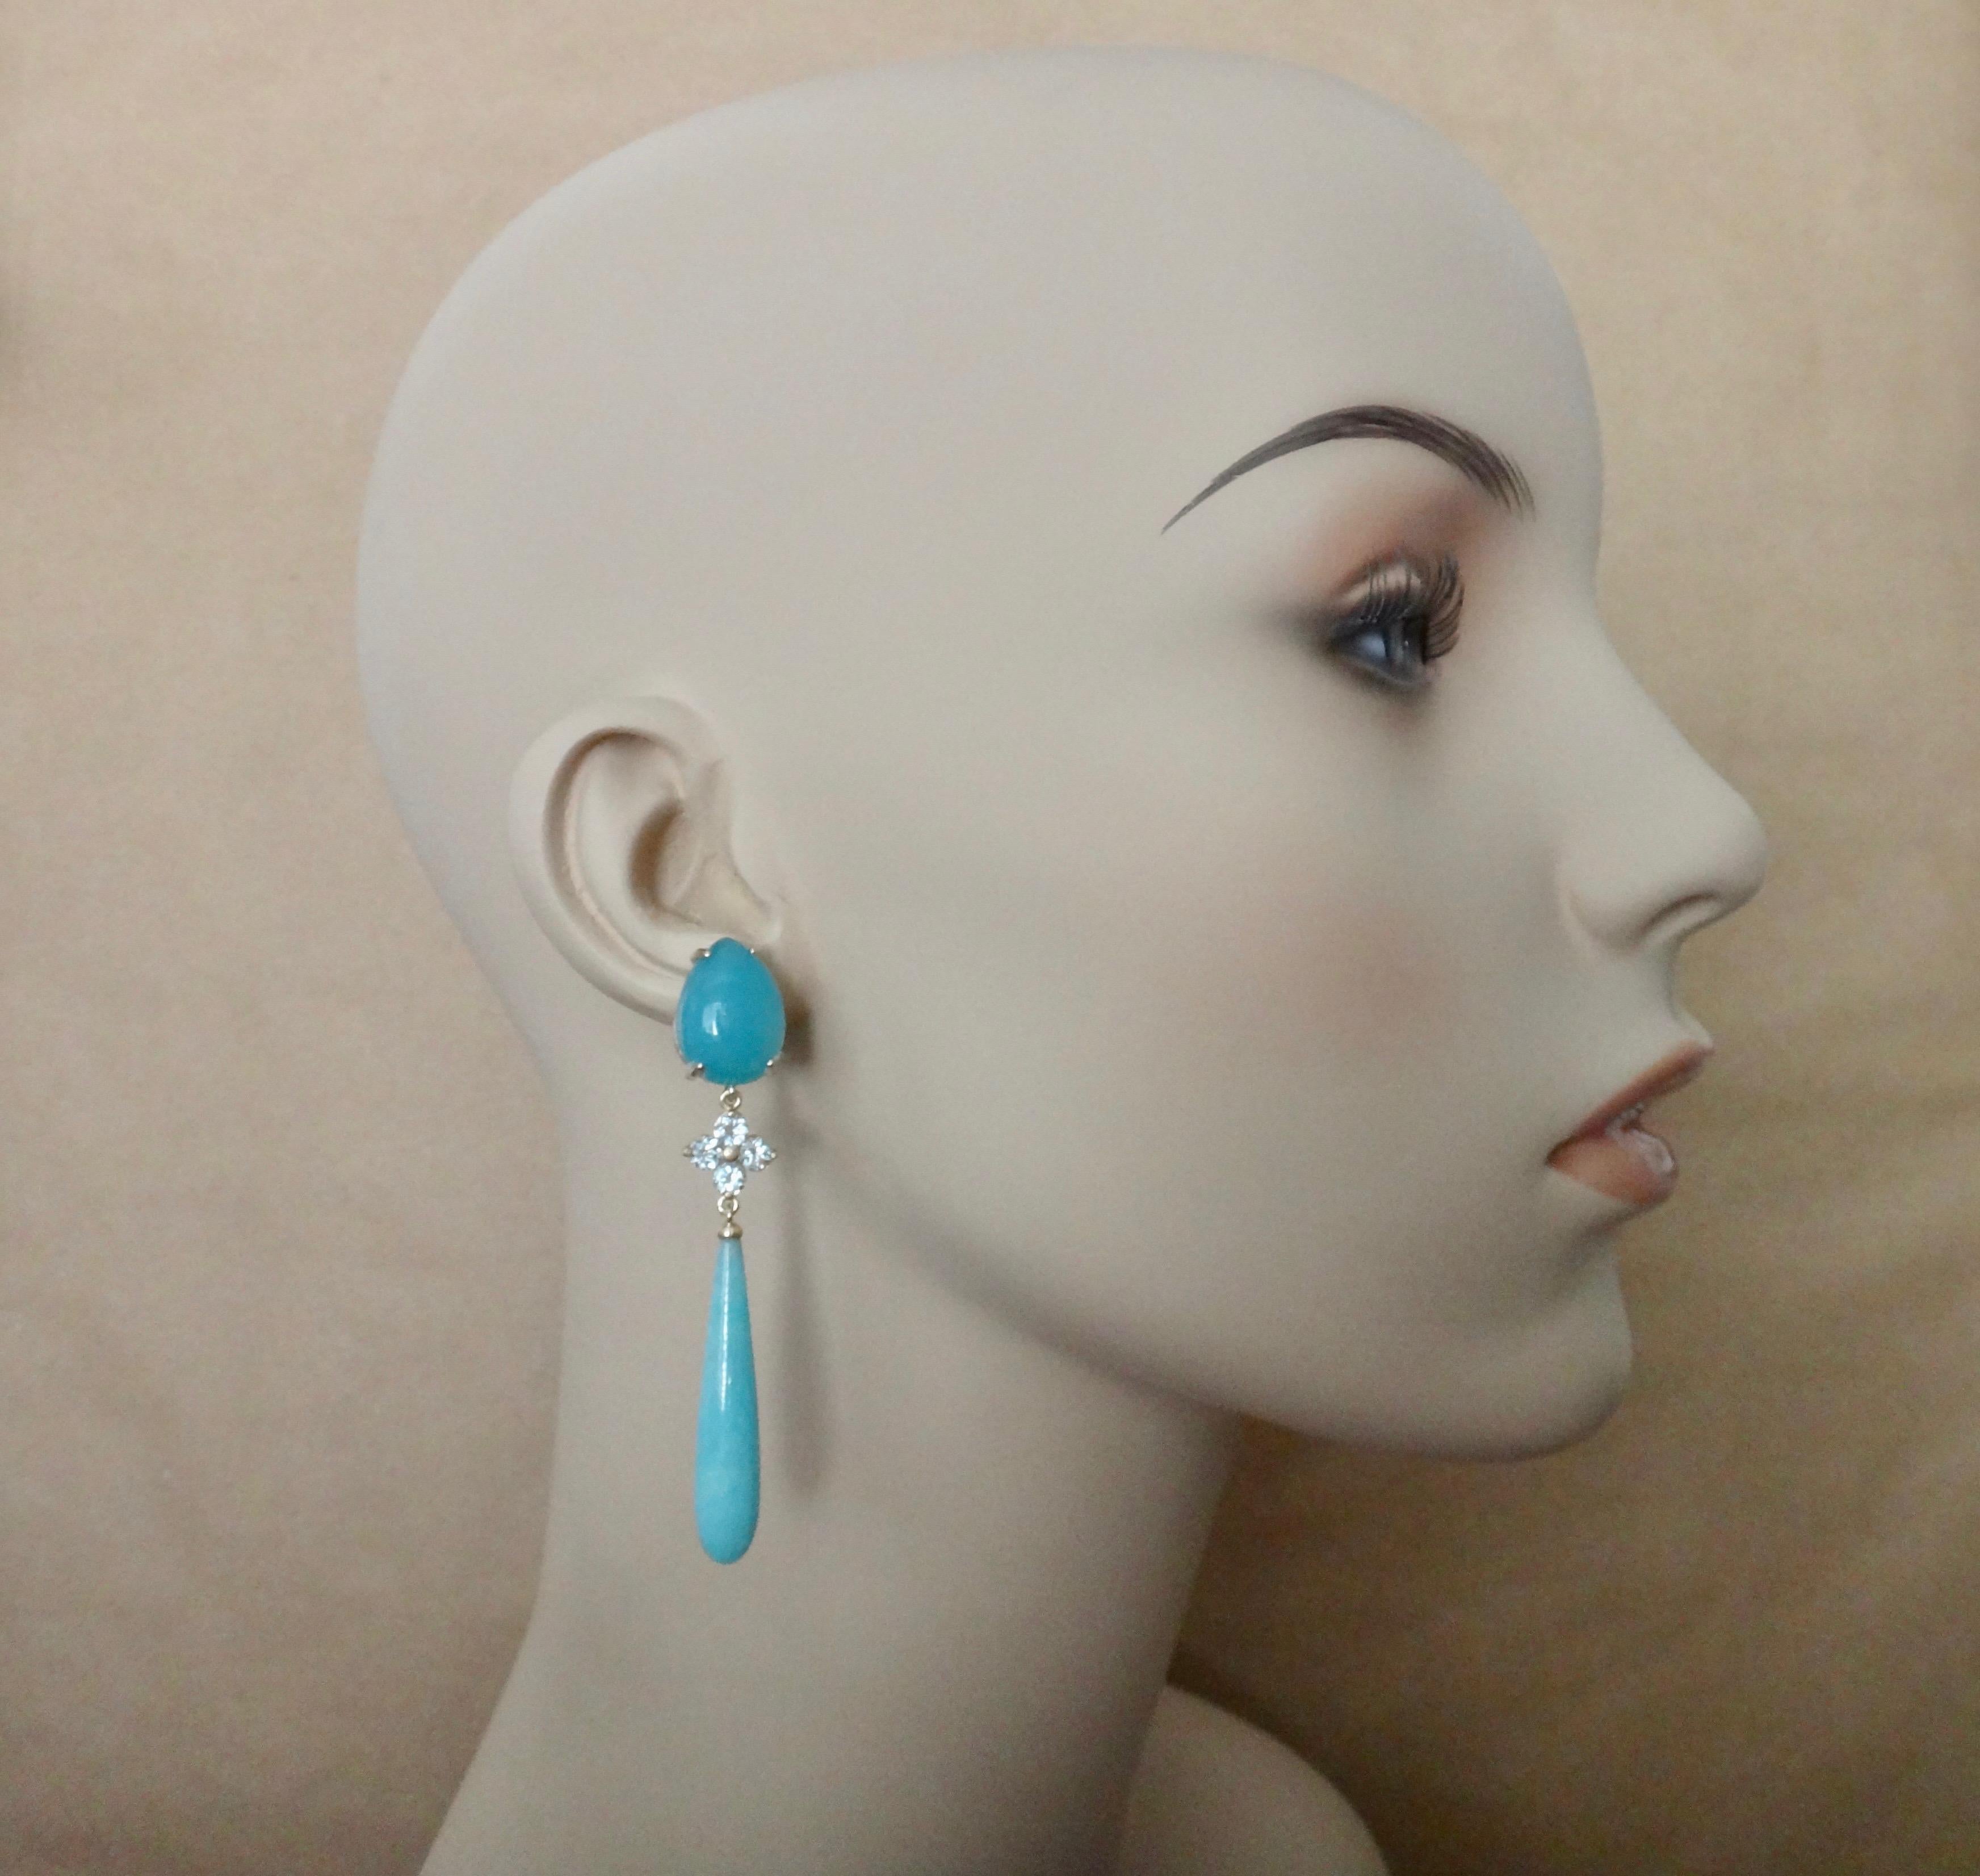 Aqua/blue chalcedony (origin: Uruguay) is complimented by eight brilliant cut aquamarines (origin: Brazil), and amazonite clubs (origin: Colorado, United States) in these outstanding dangle earrings.  The chalcedony is polished to a glass-like